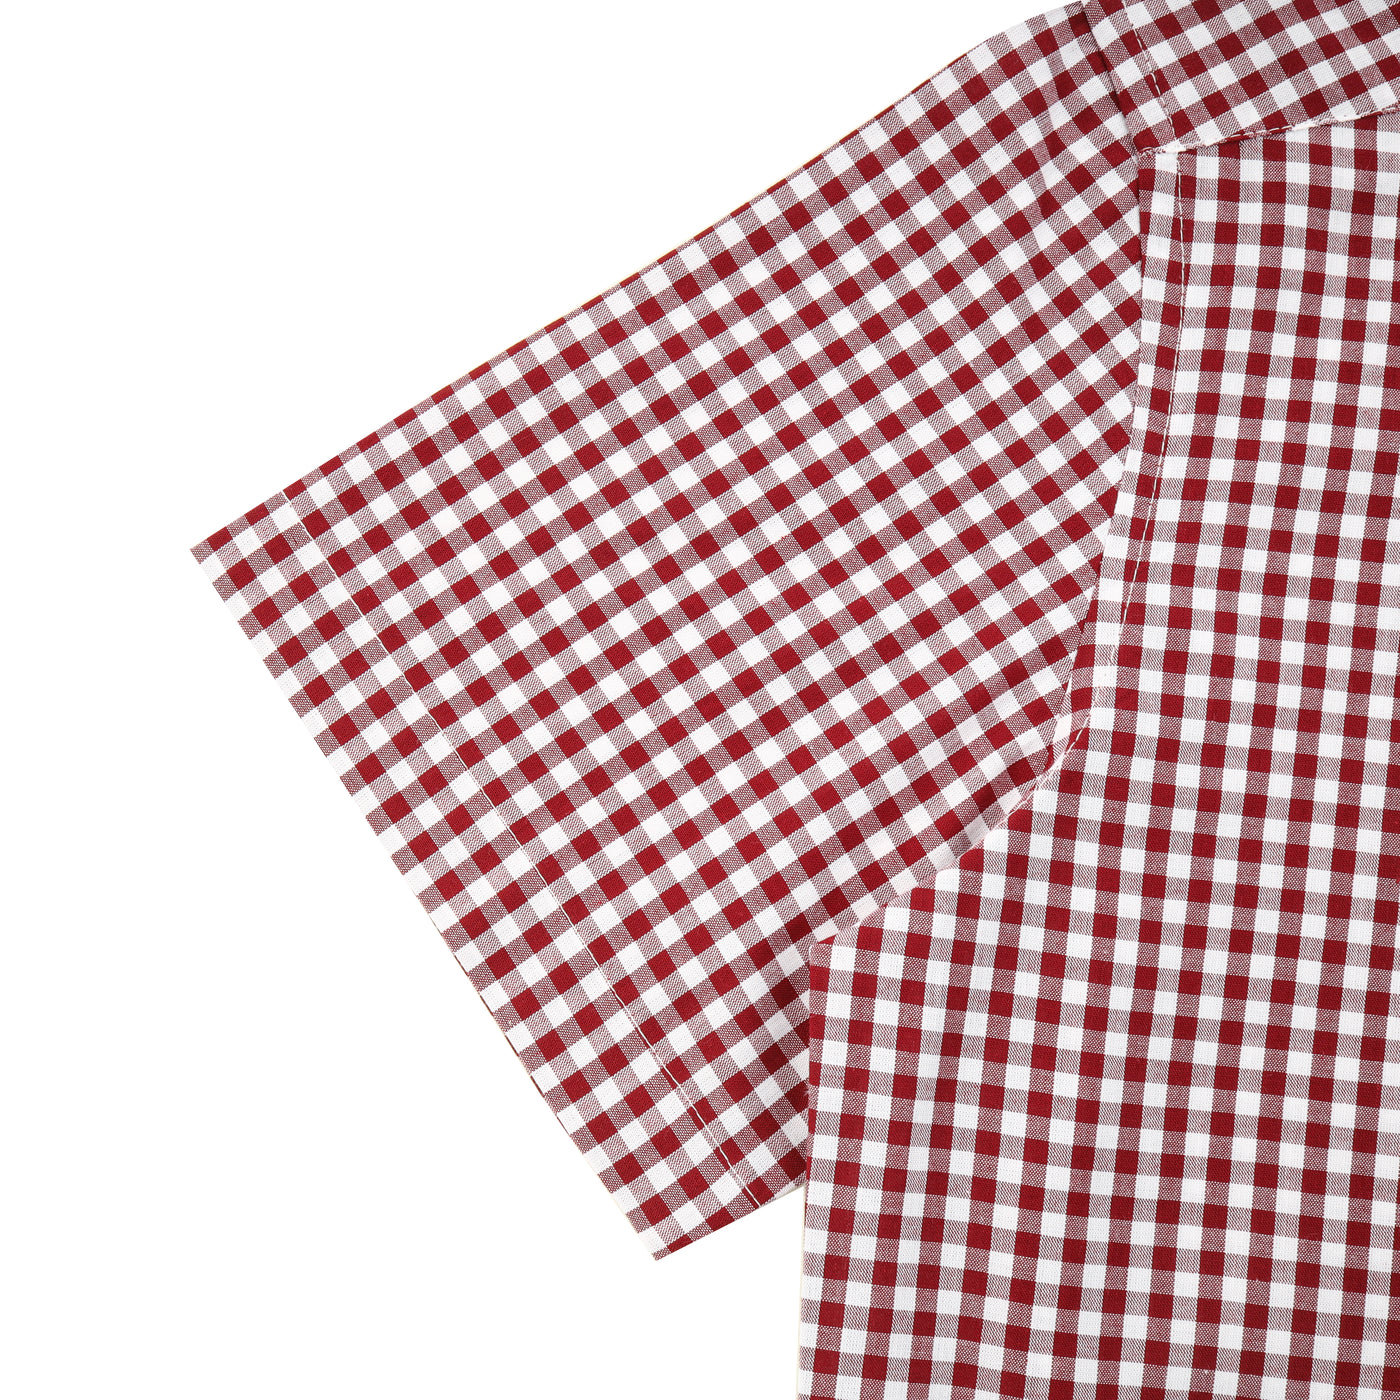 Checked Red & White Cotton Short Sleeves Shirt